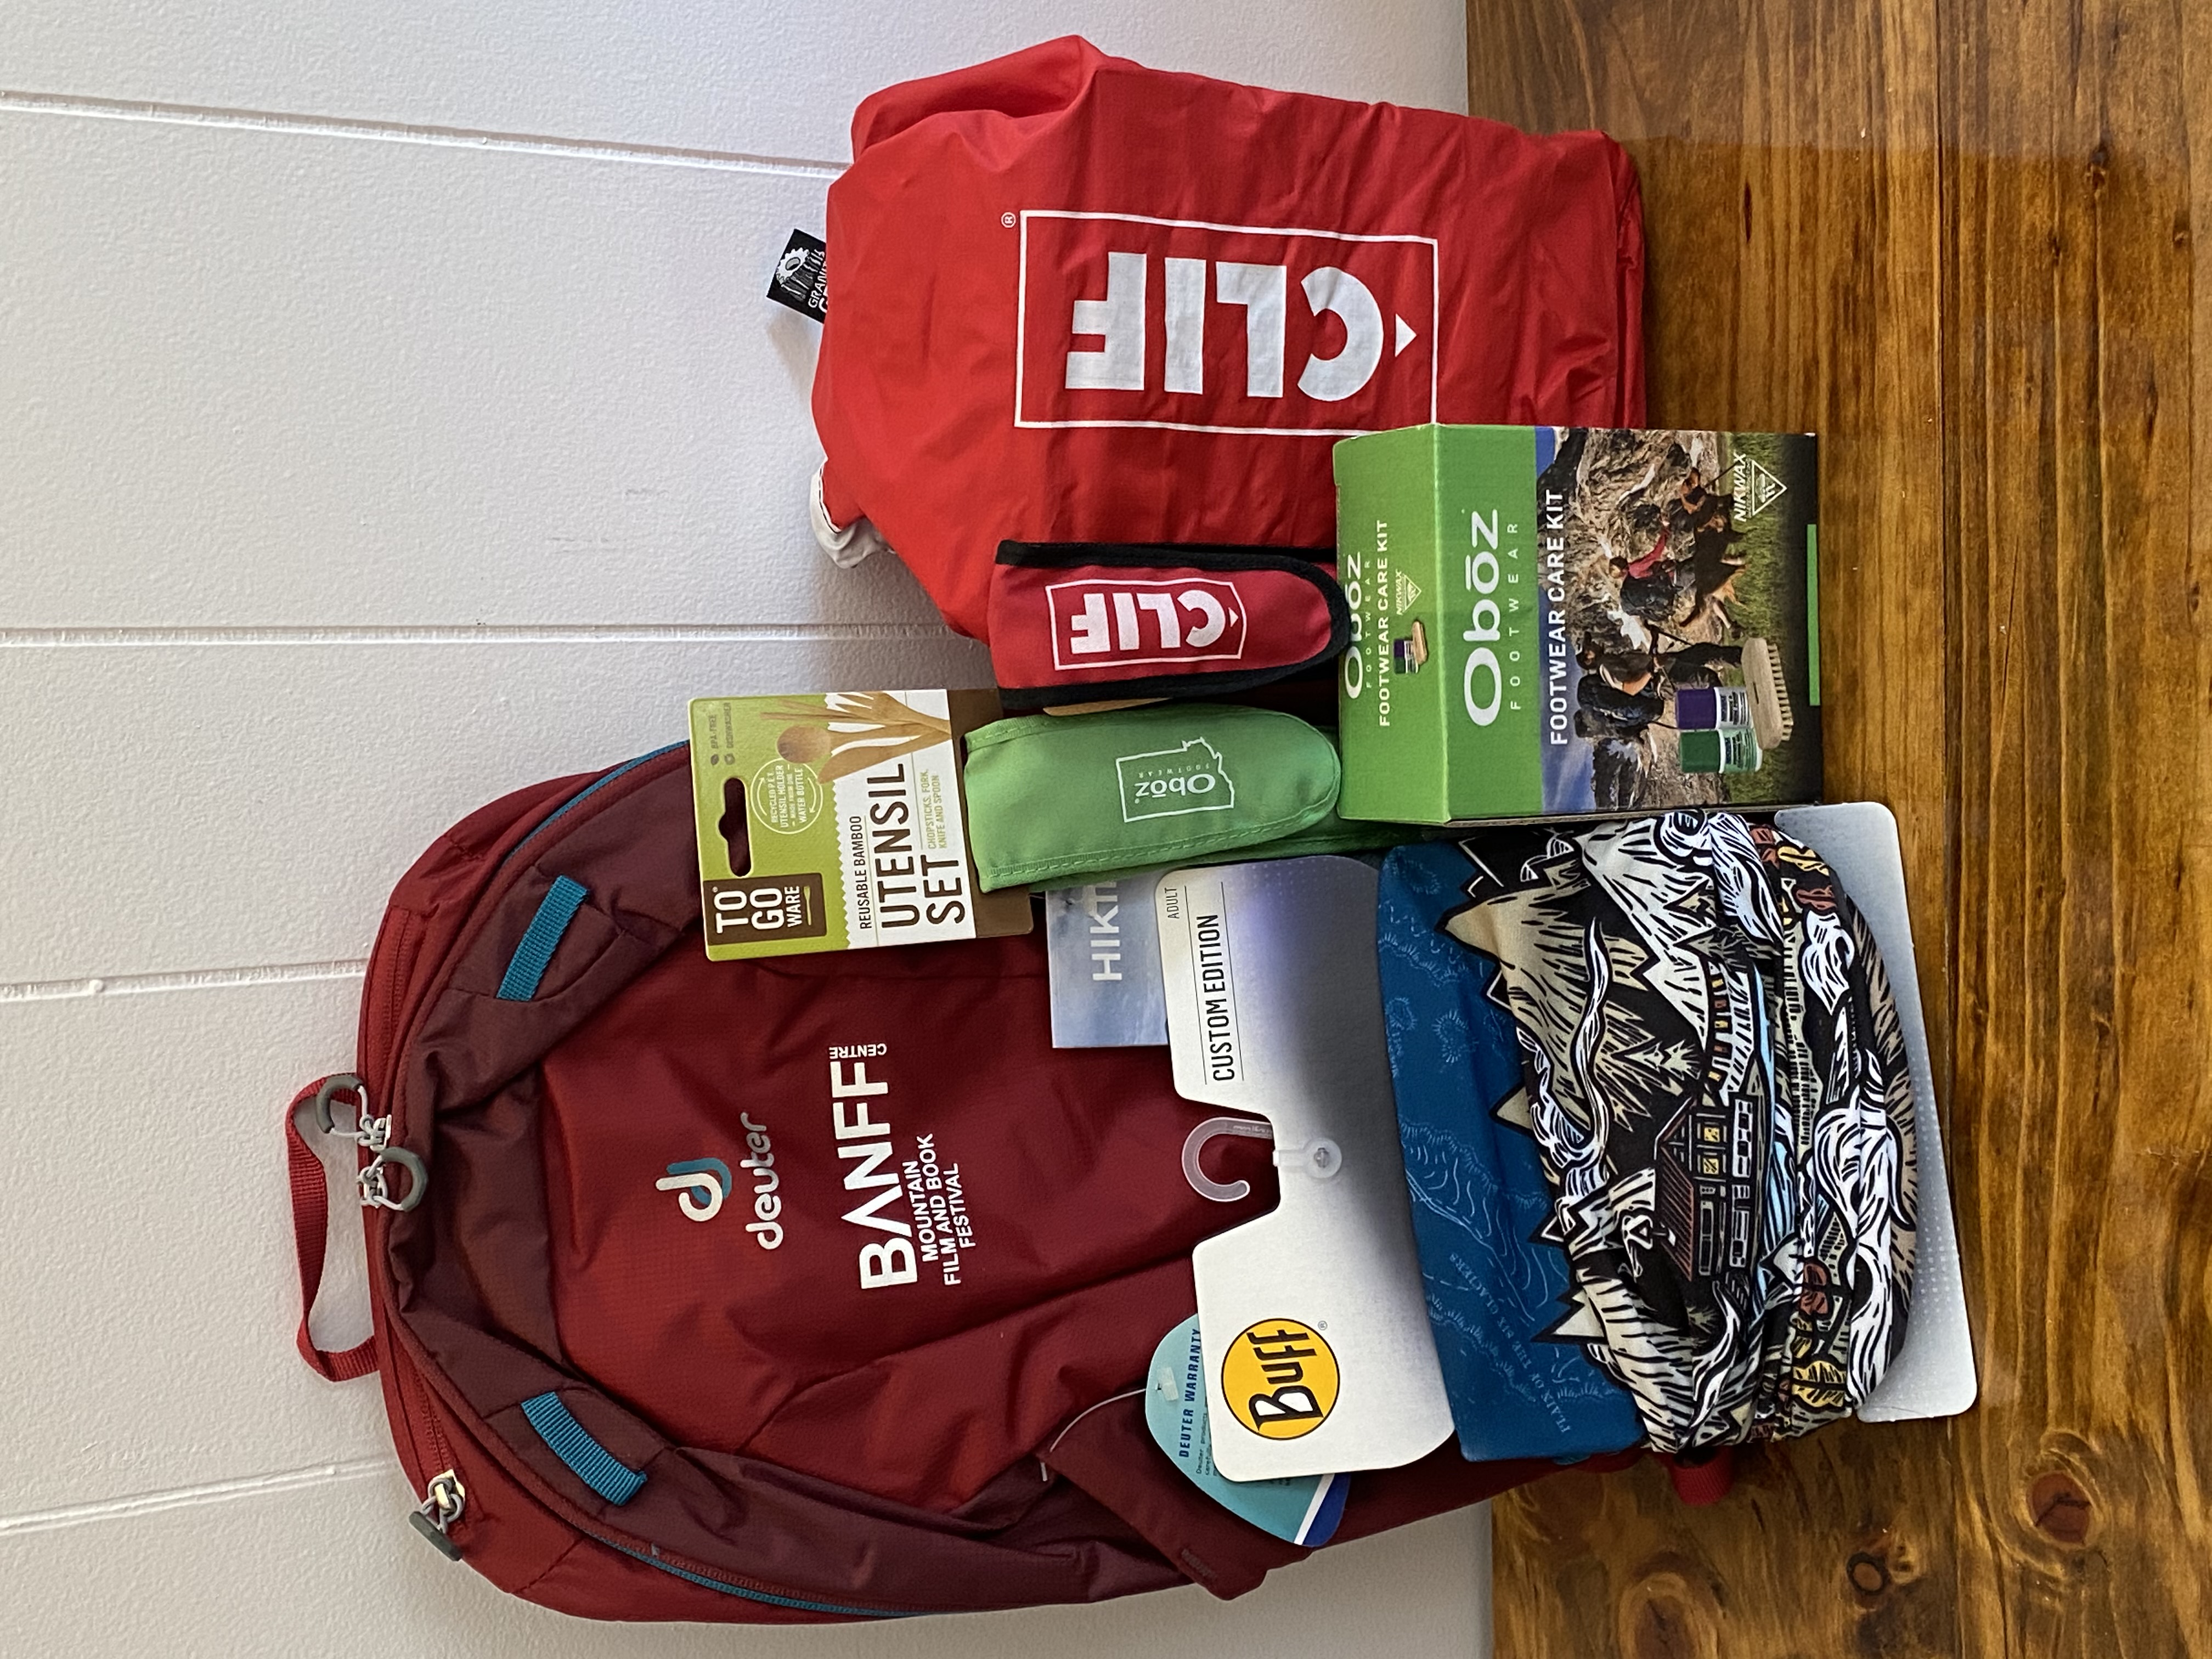 A photo of the items available in the Banff prize package, including a red backpack, red tote bag, a face mask, and green package containing a utensils kit